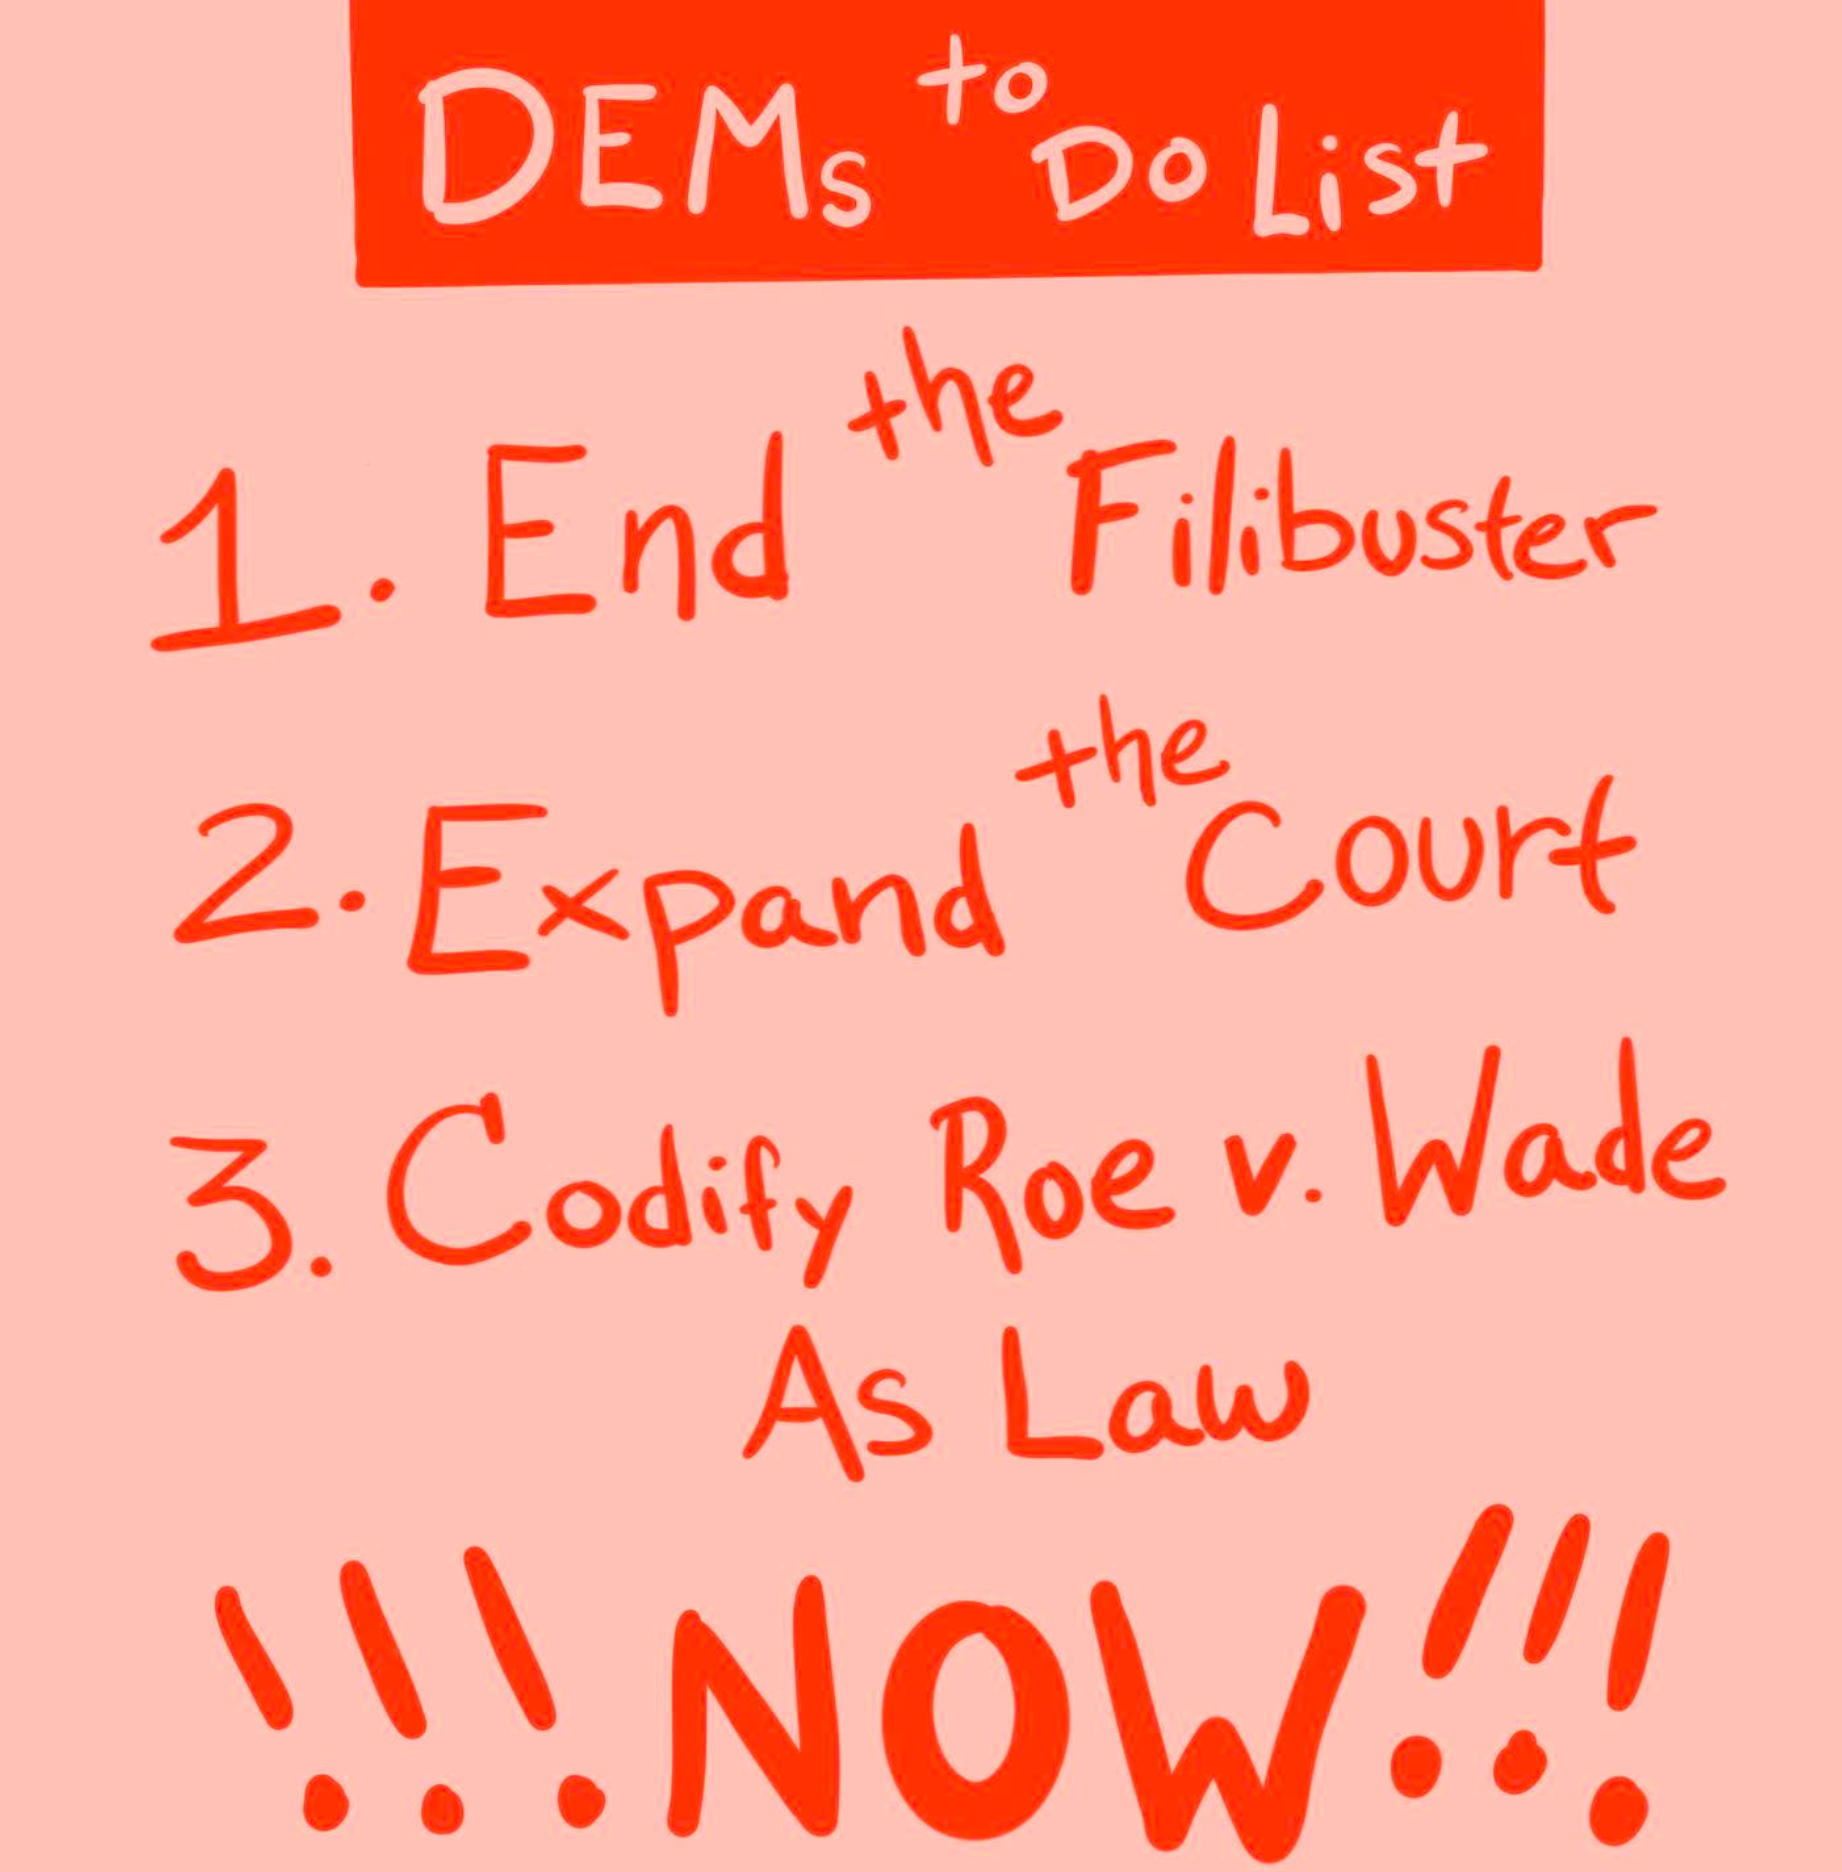 Dems to do list: Protect reproductive rights.